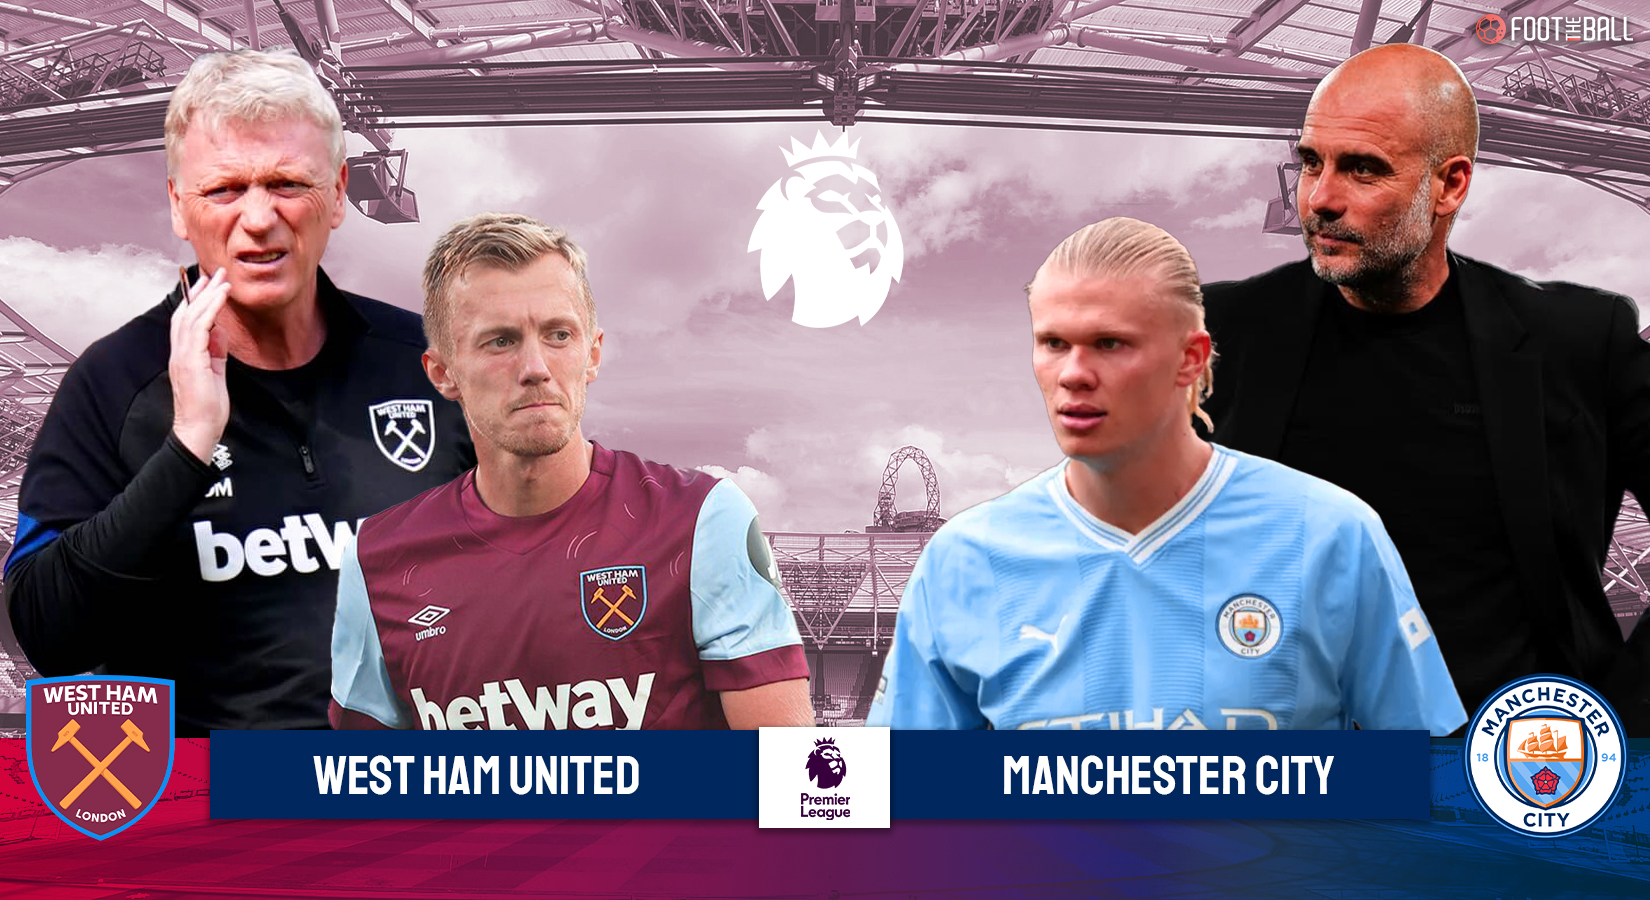 West-Ham-United-vs-Manchester-City-preview.jpg